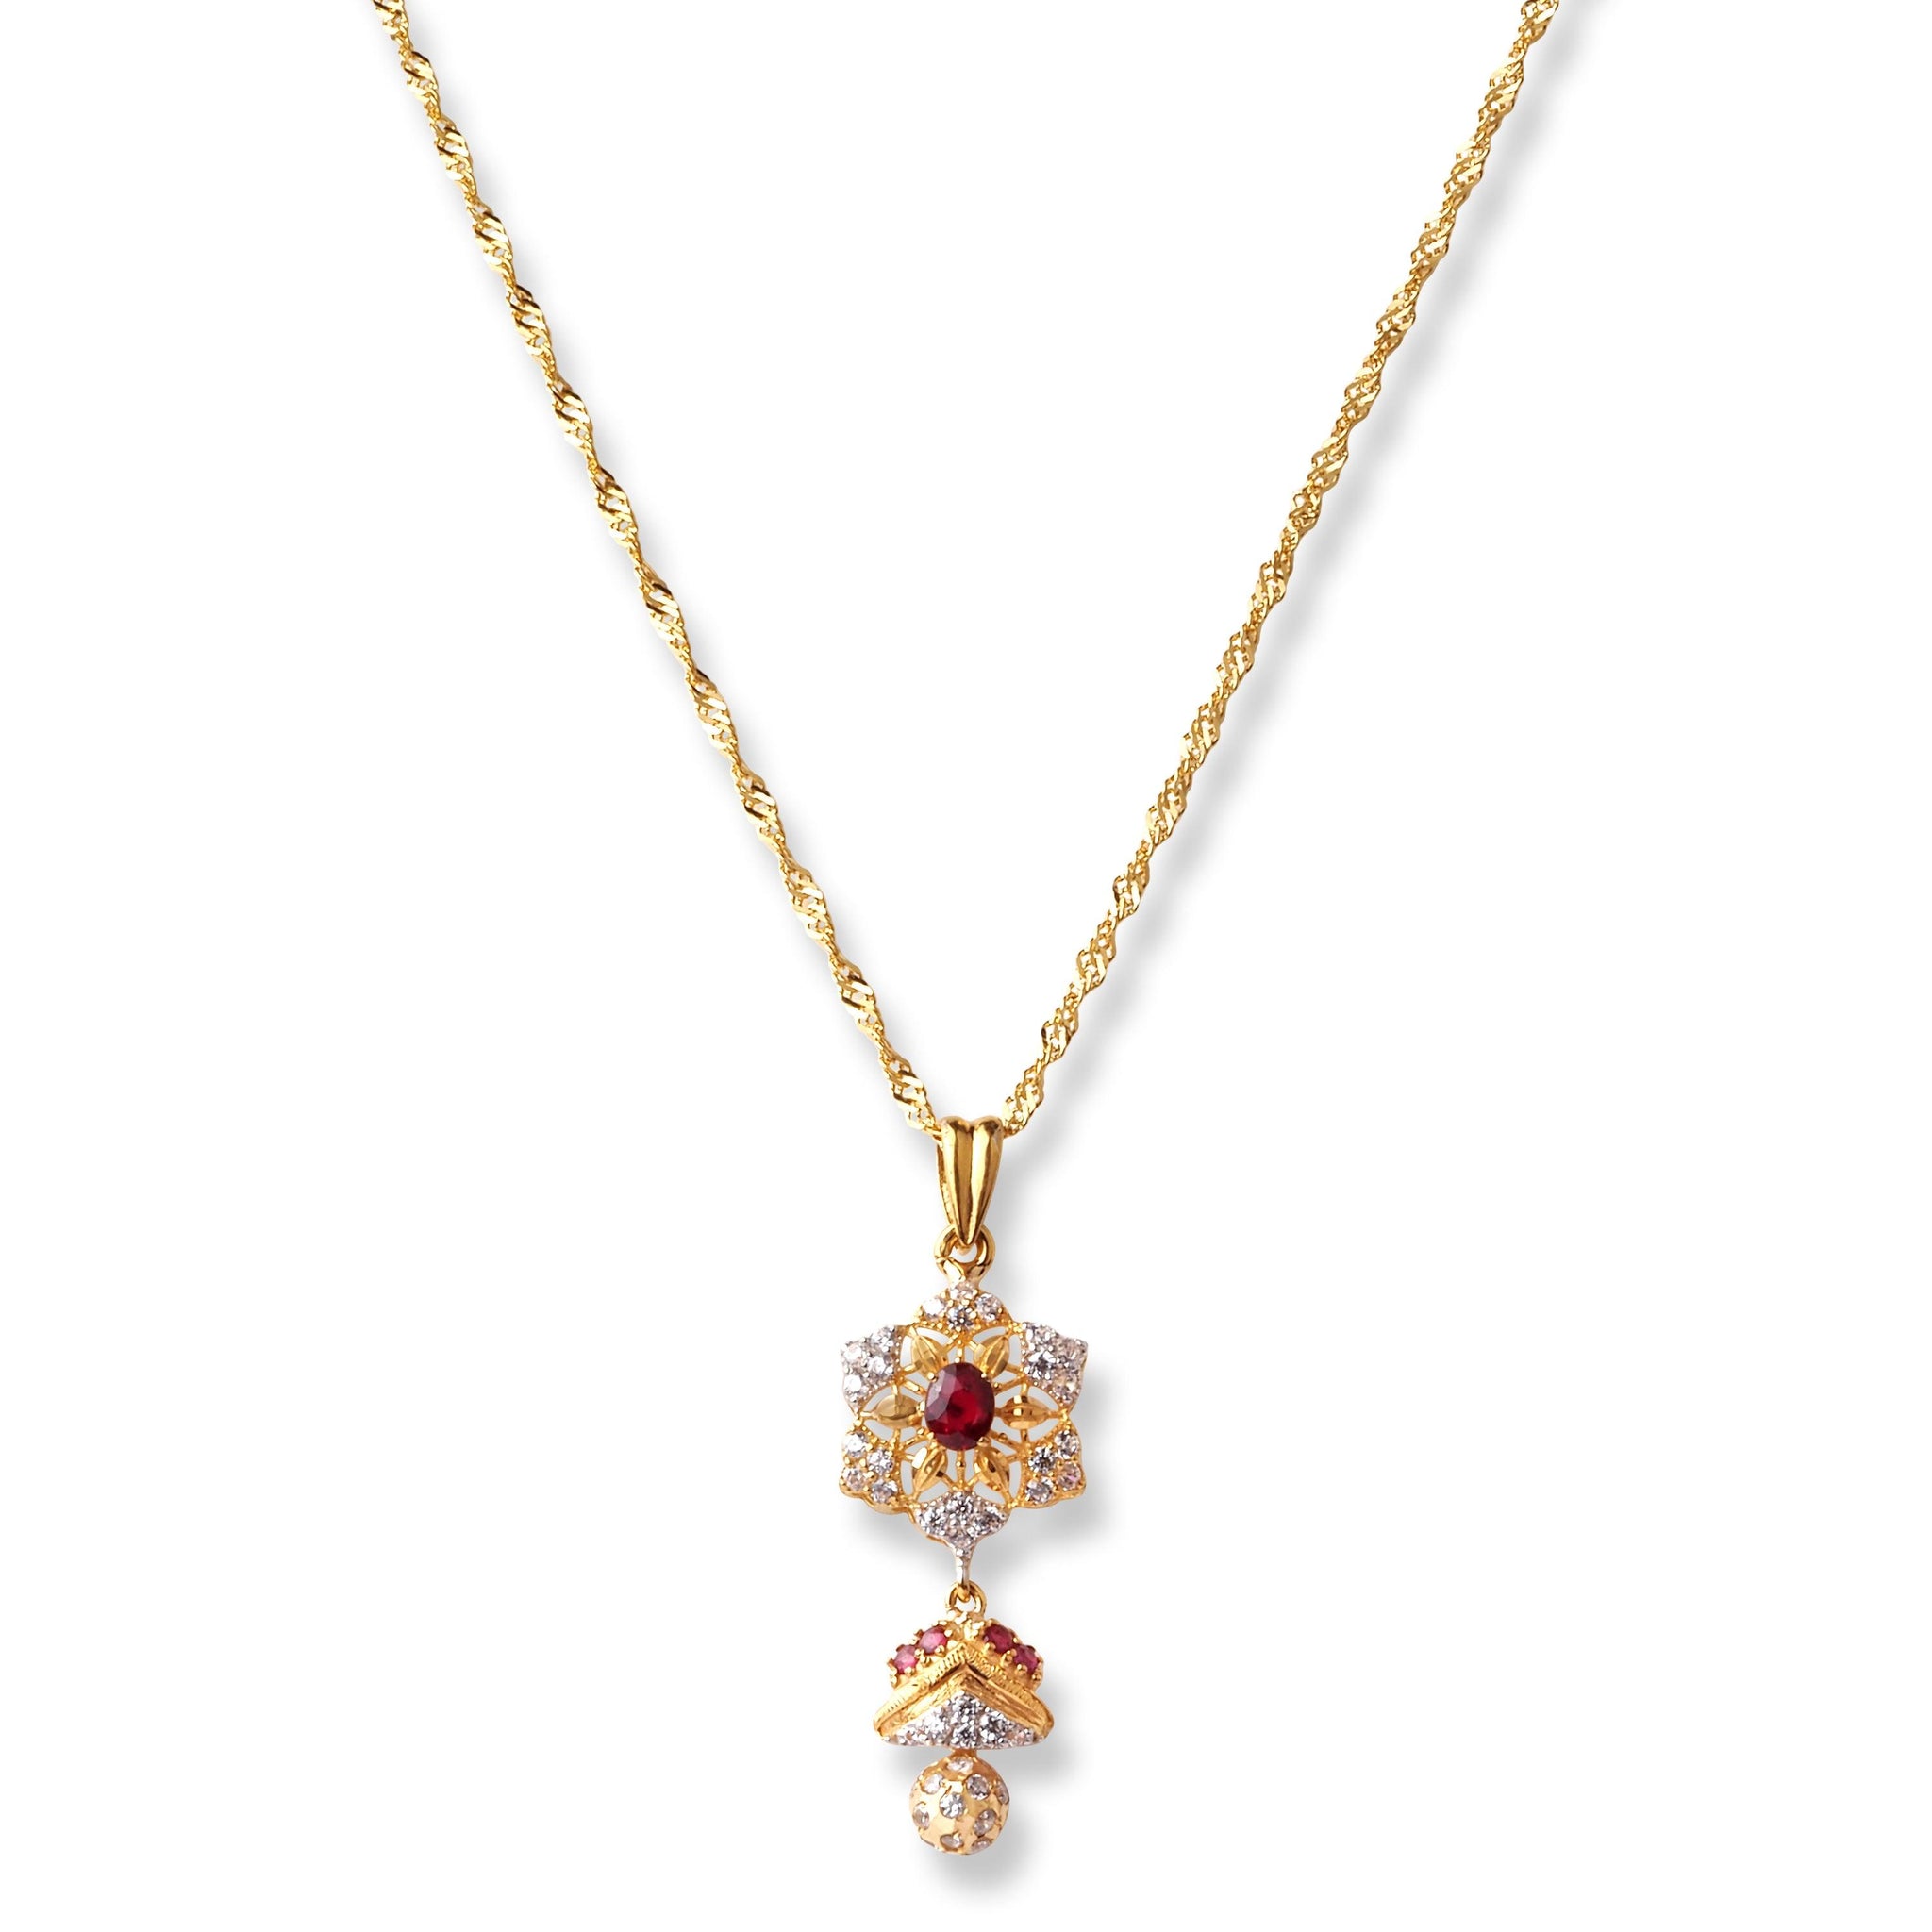 22ct Gold White & Red Cubic Zirconia with Drop Design Chain, Pendant and Earrings Set (13.8g) C-2803 P-7793 E-7793